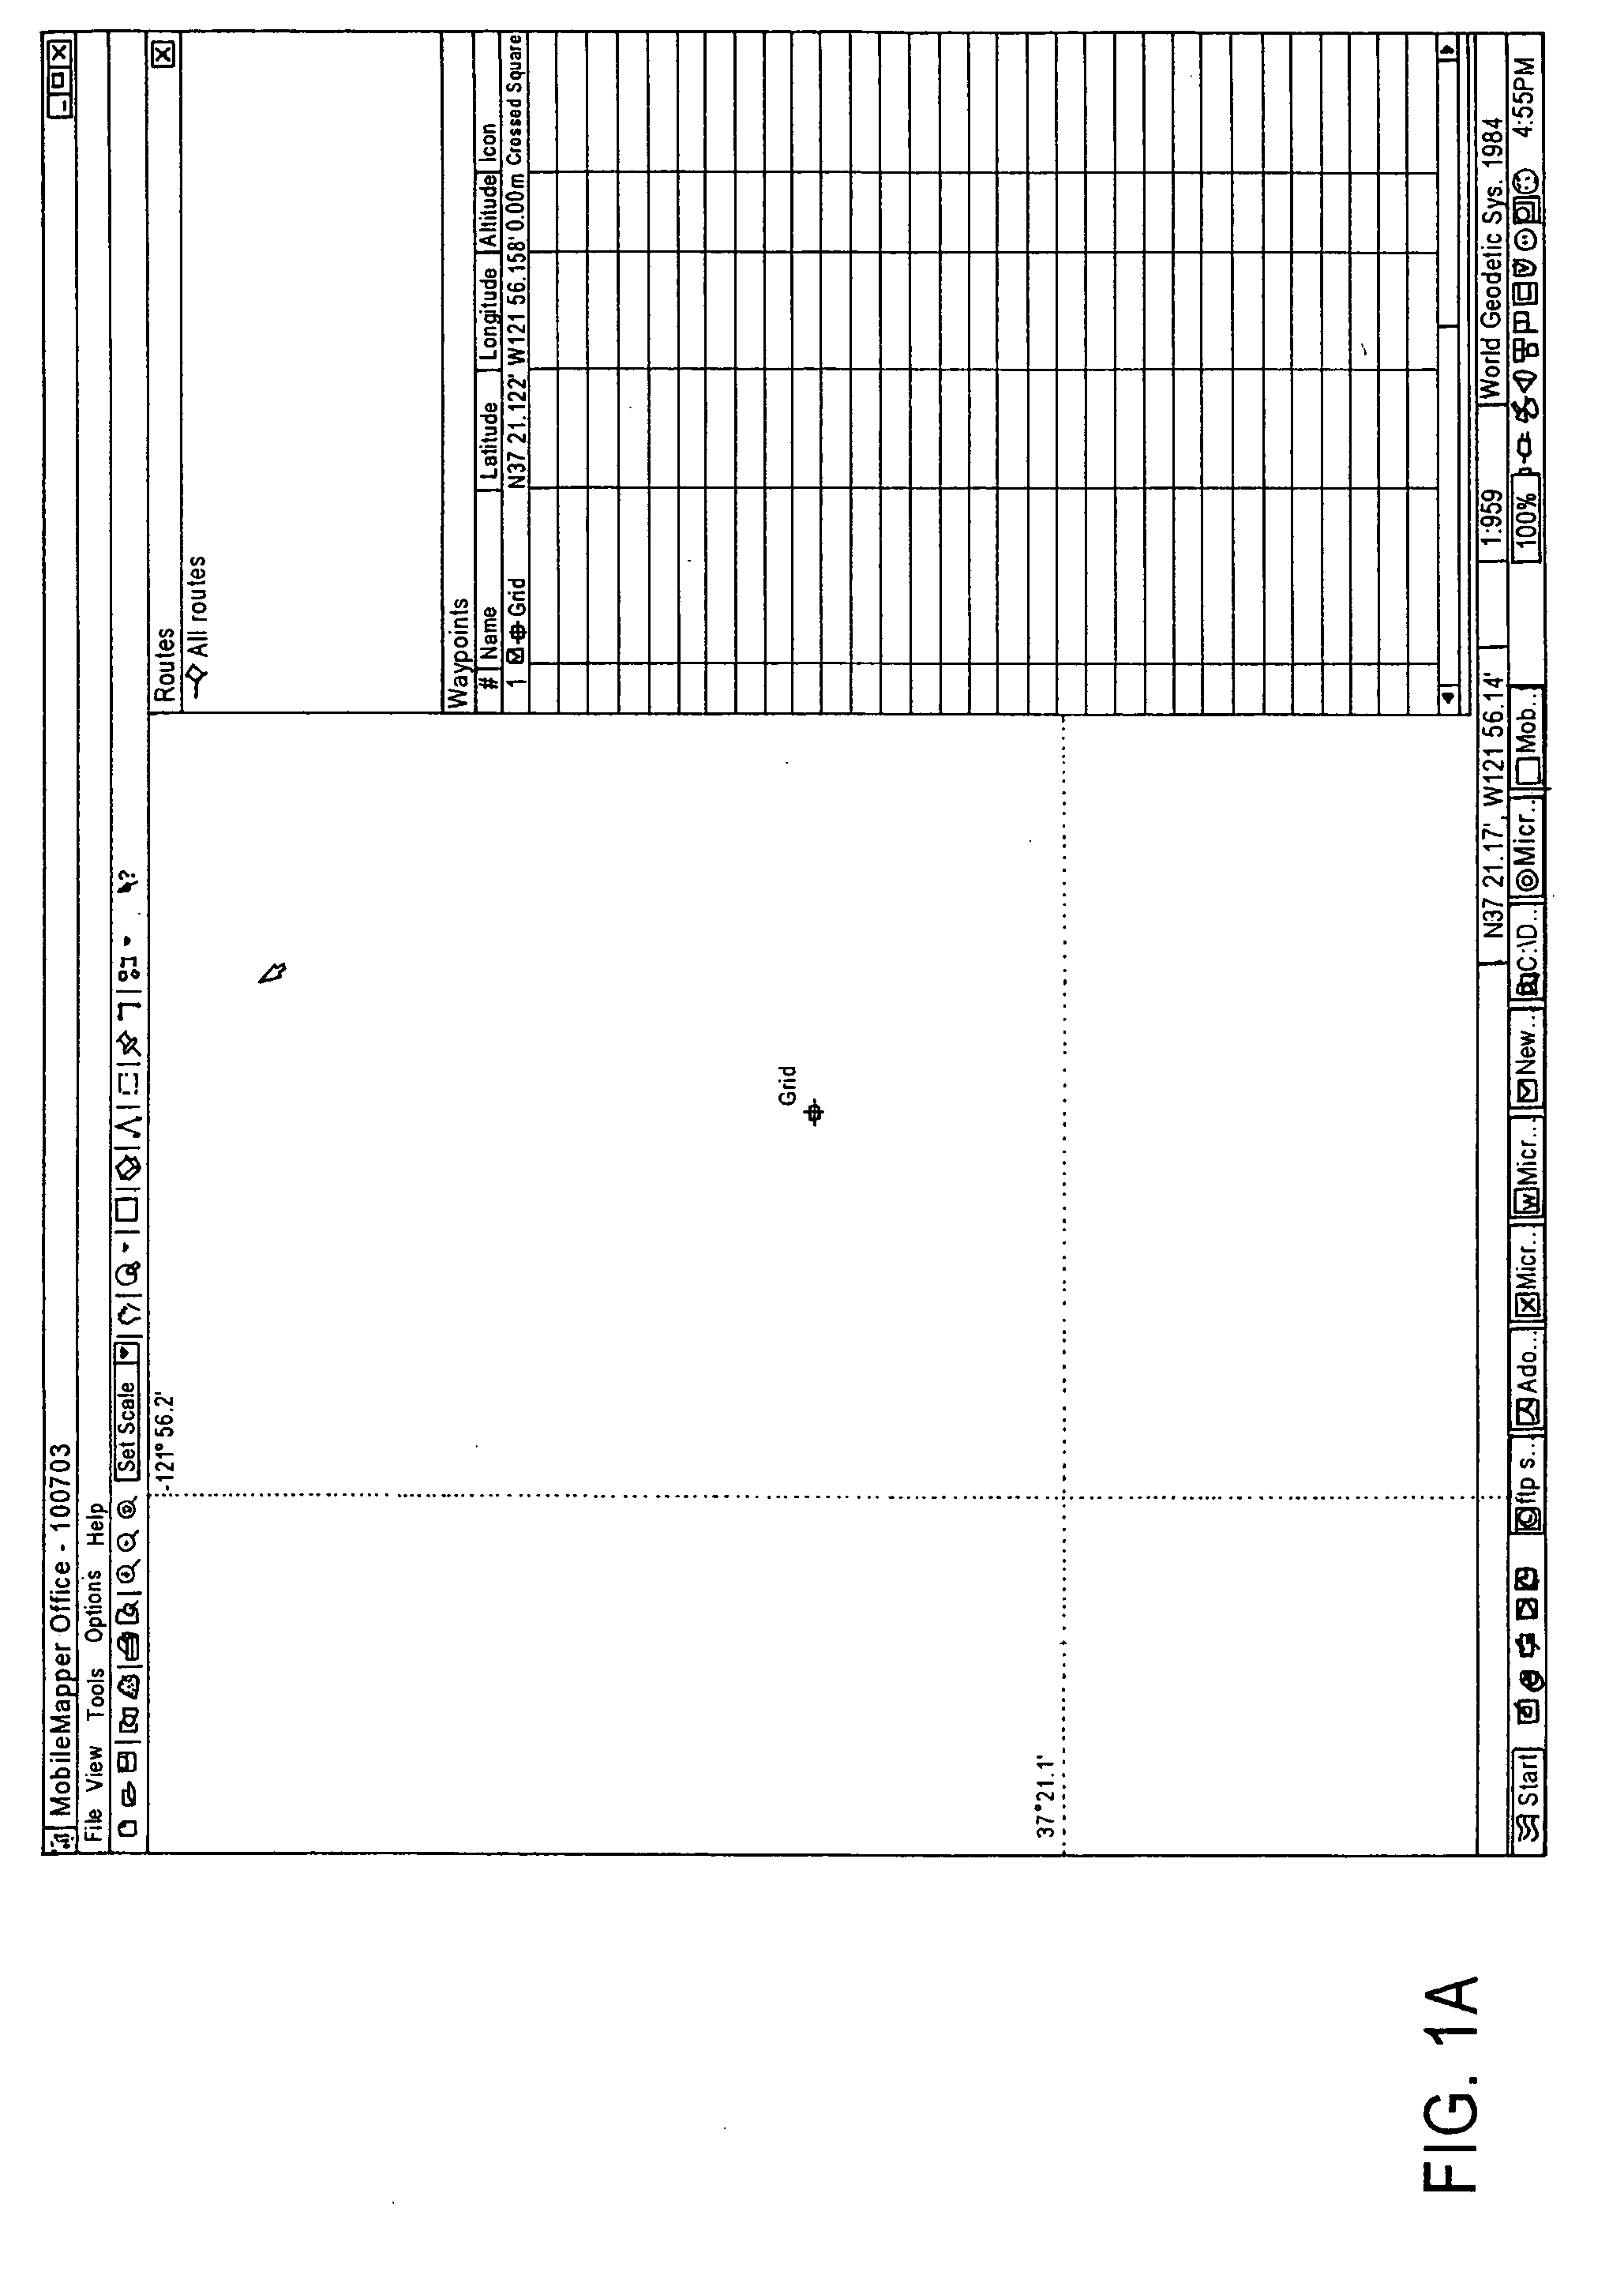 Grid mapping utility for a GPS device